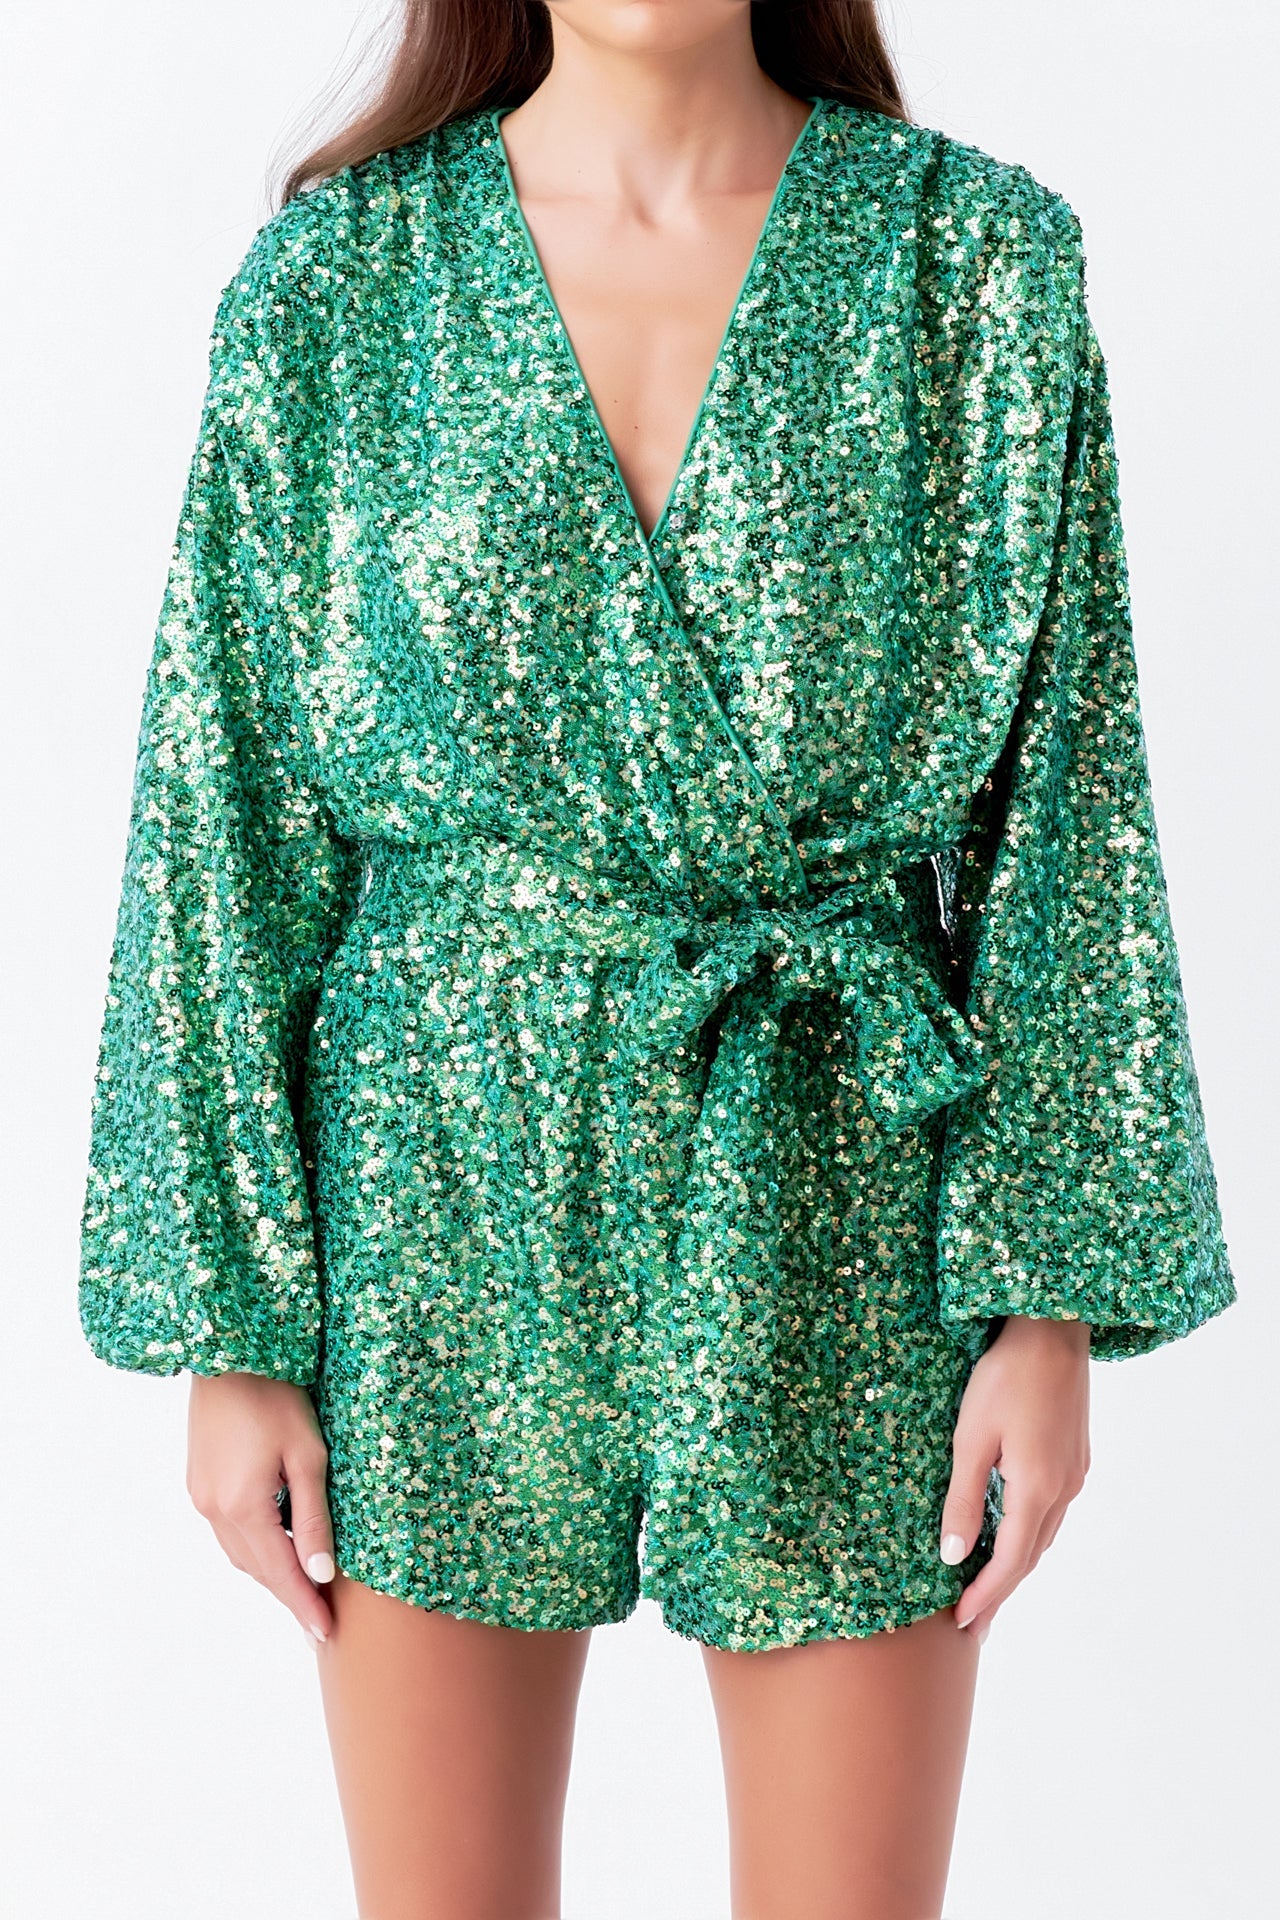 Endless Rose - Sequin Romper - Rompers in Women's Clothing available at endlessrose.com